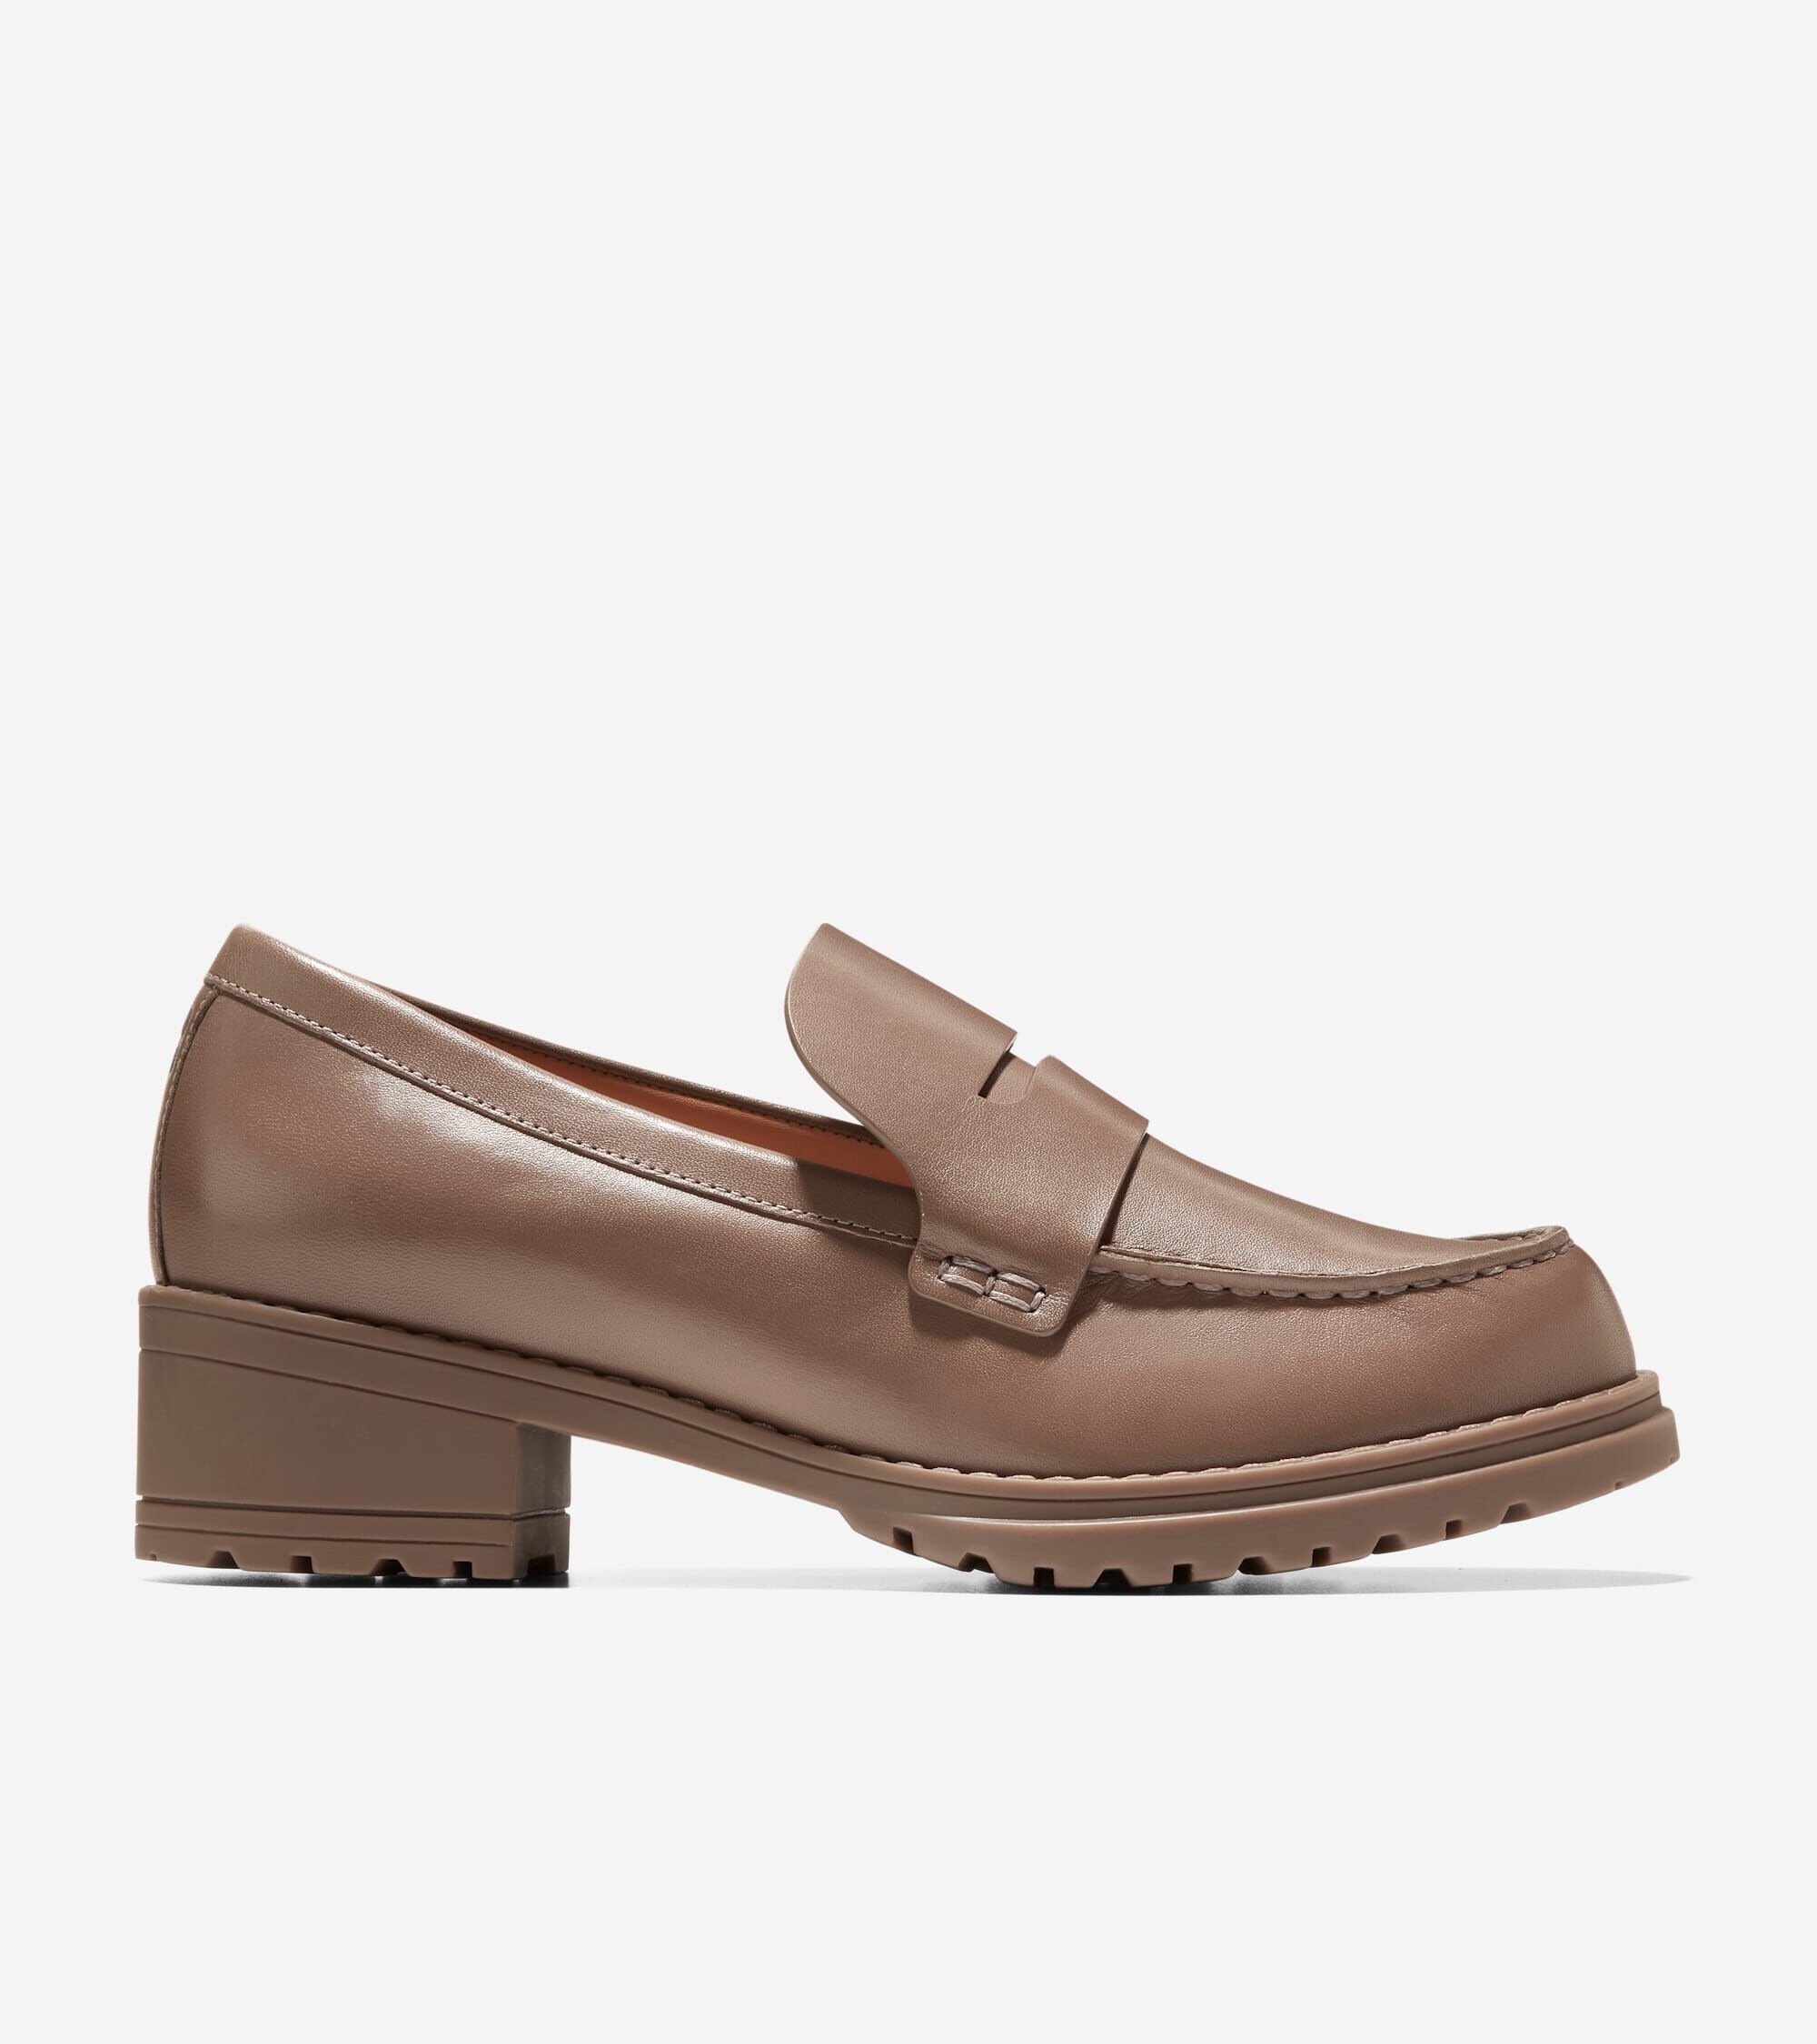 Women's Shoes & Accesories On Sale | Cole Haan